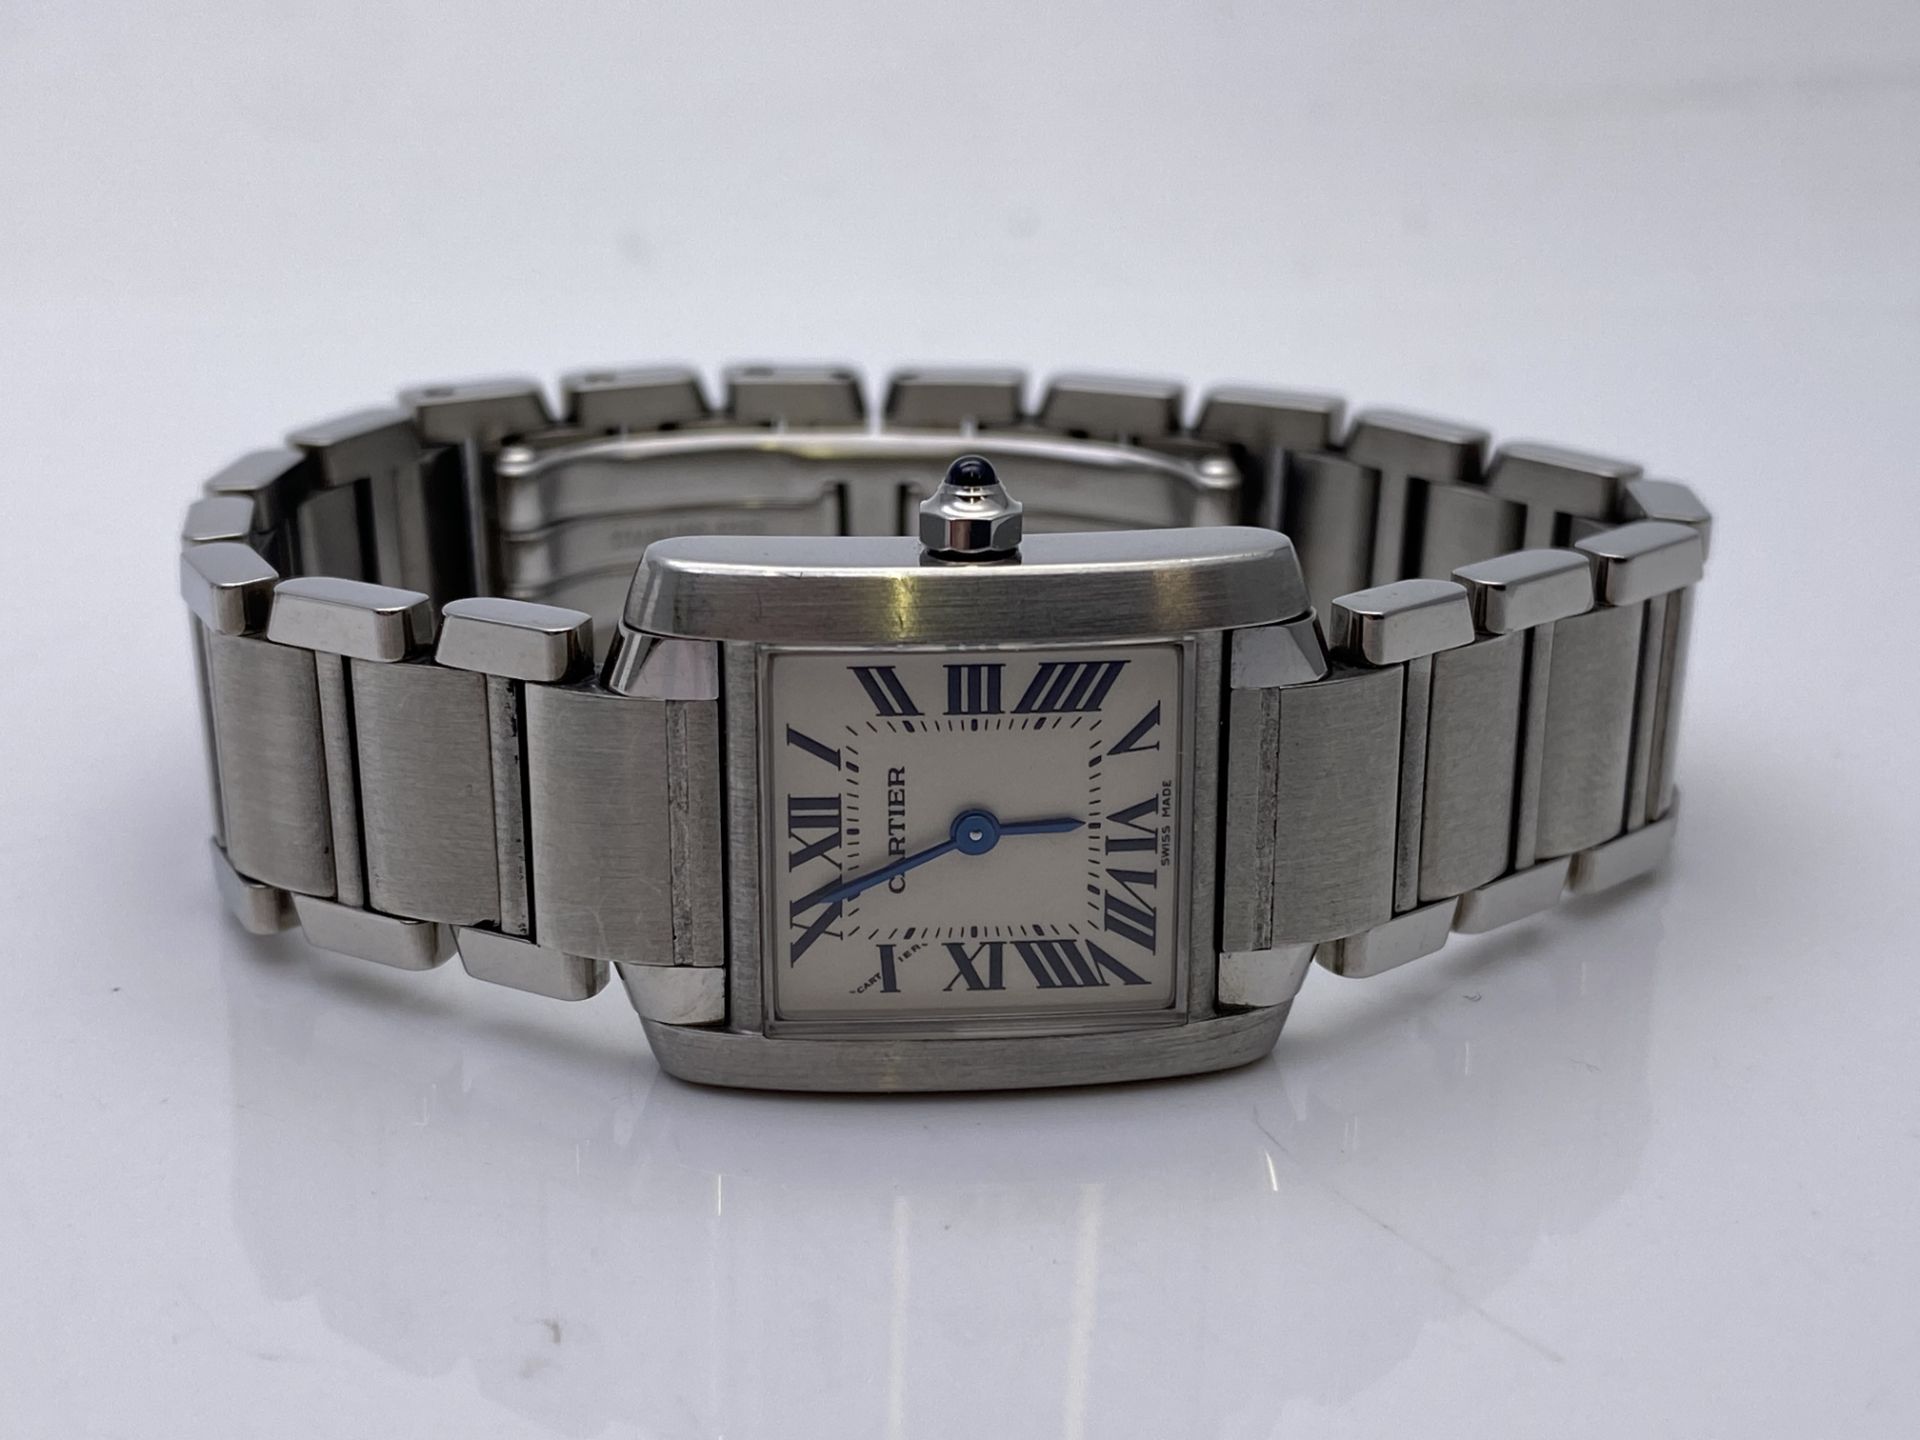 LADIES CARTIER TANK FRANCAISE WATCH, STAINLESS STEEL, WATCH ONLY (352)